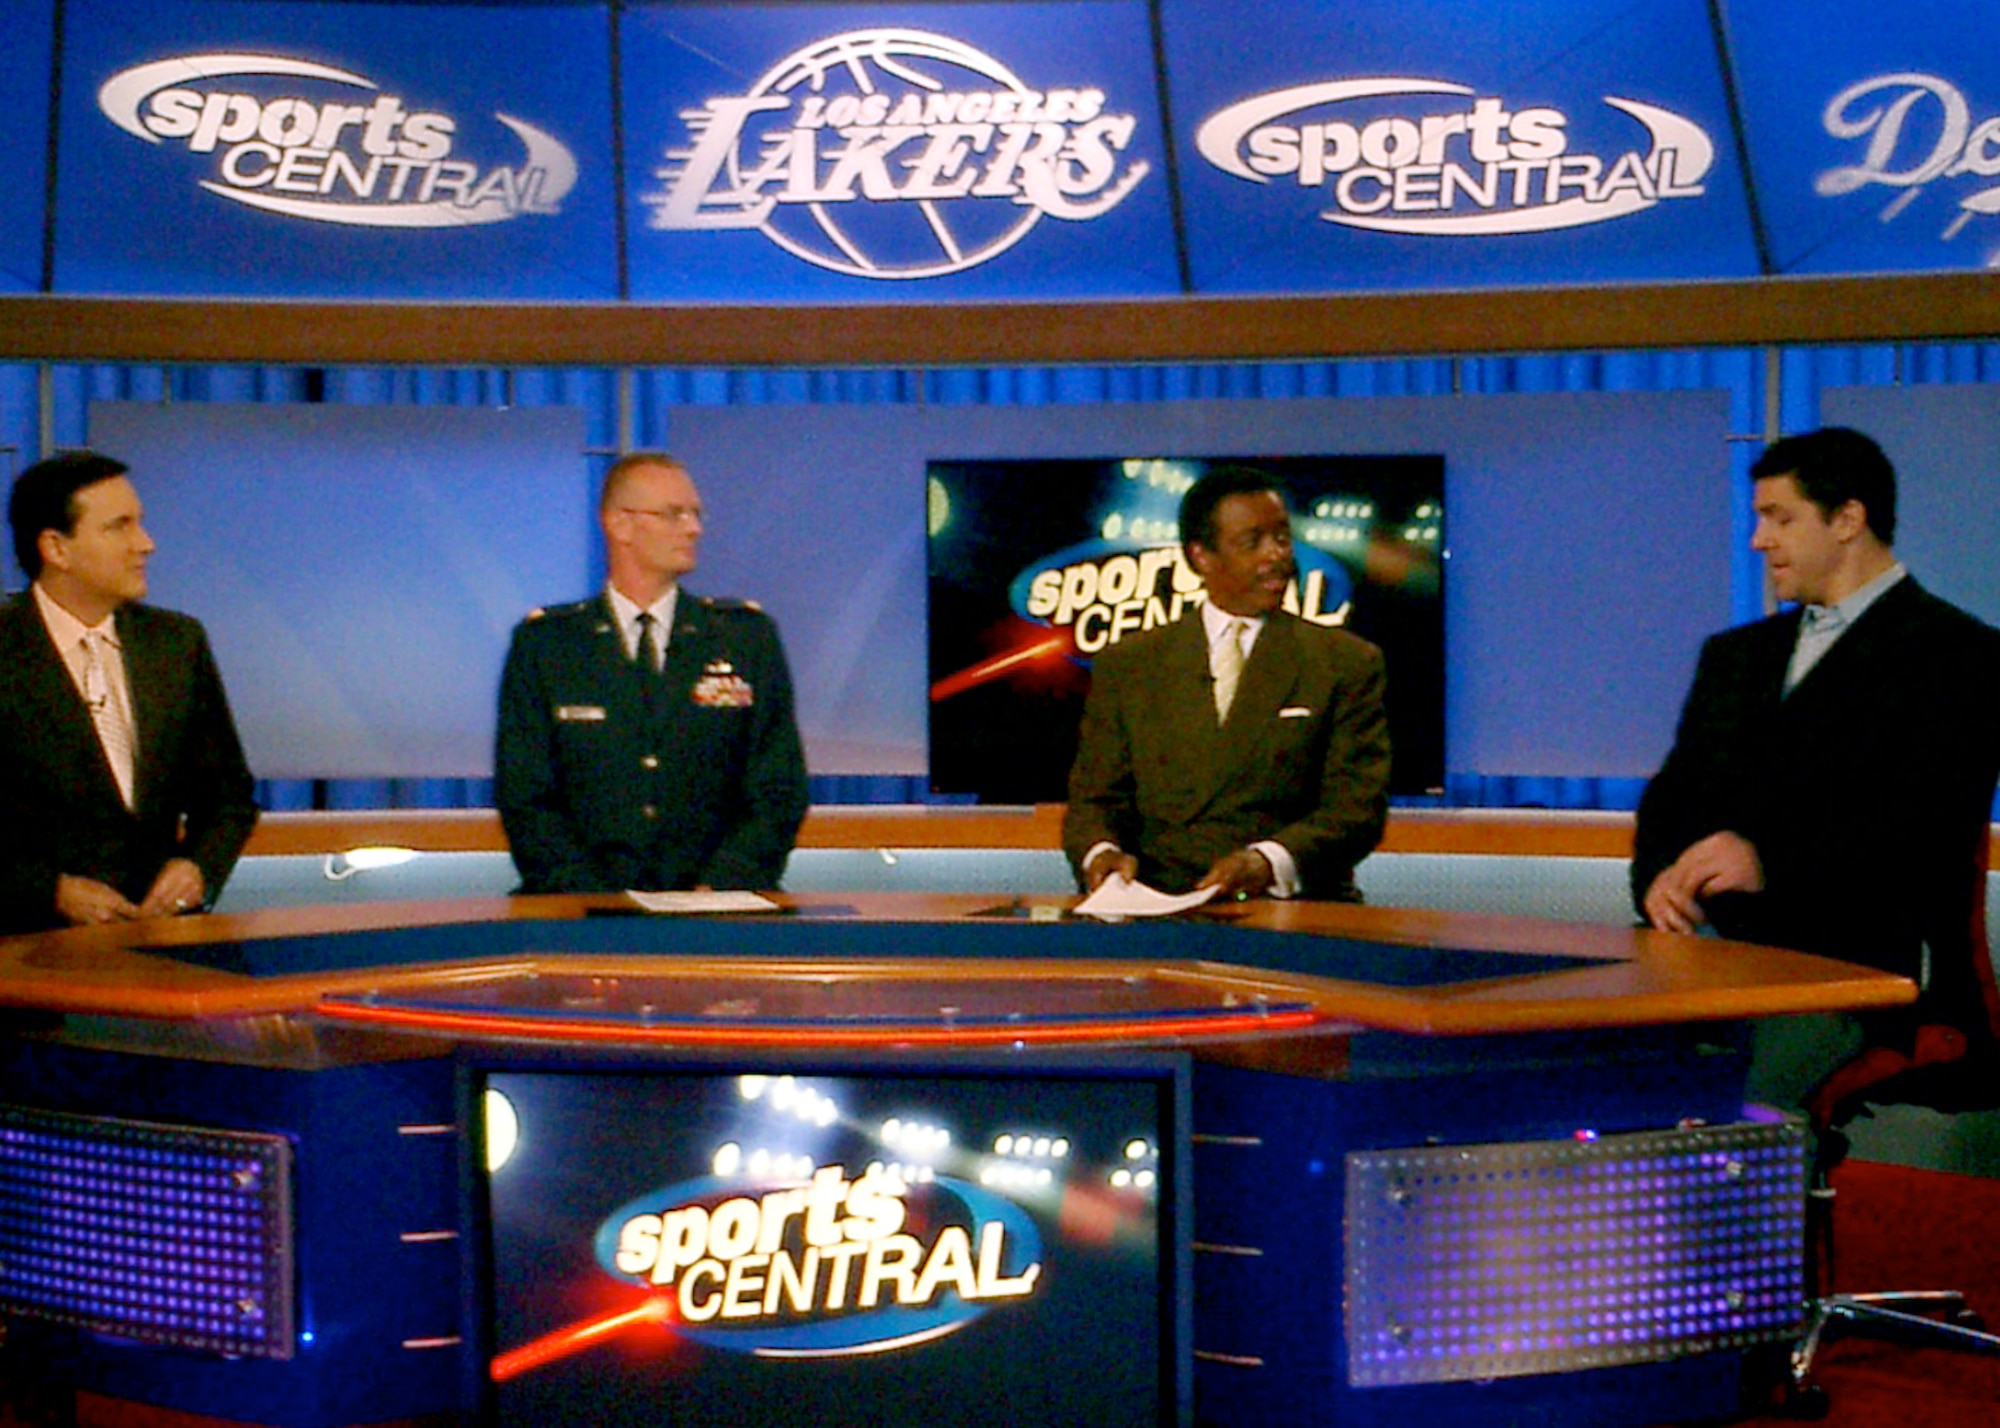 CBS Los Angeles sports anchors Gary Miller (left) and Jim Hill (3rd from left) interview Maj. Dale Winger (2nd from left), Space and Missile Systems Center's Global Positioning Systems Wing, and LA Kings hockey player, Sean O'Donnell (right) during the Channel 2, Sports Central newscast, Feb. 15. Major Winger was honored in Nov. 2008 by the Kings team at The Staples Center as an Air Force military member who had been deployed. Major Winger said the experience was "Awesome. To know that all those fans were cheering to support the military really made us feel appreciated." LA Kings recognize a member of the military on the ice during the National Anthem before each game at The Staples Center.(Photo by Tina Greer)